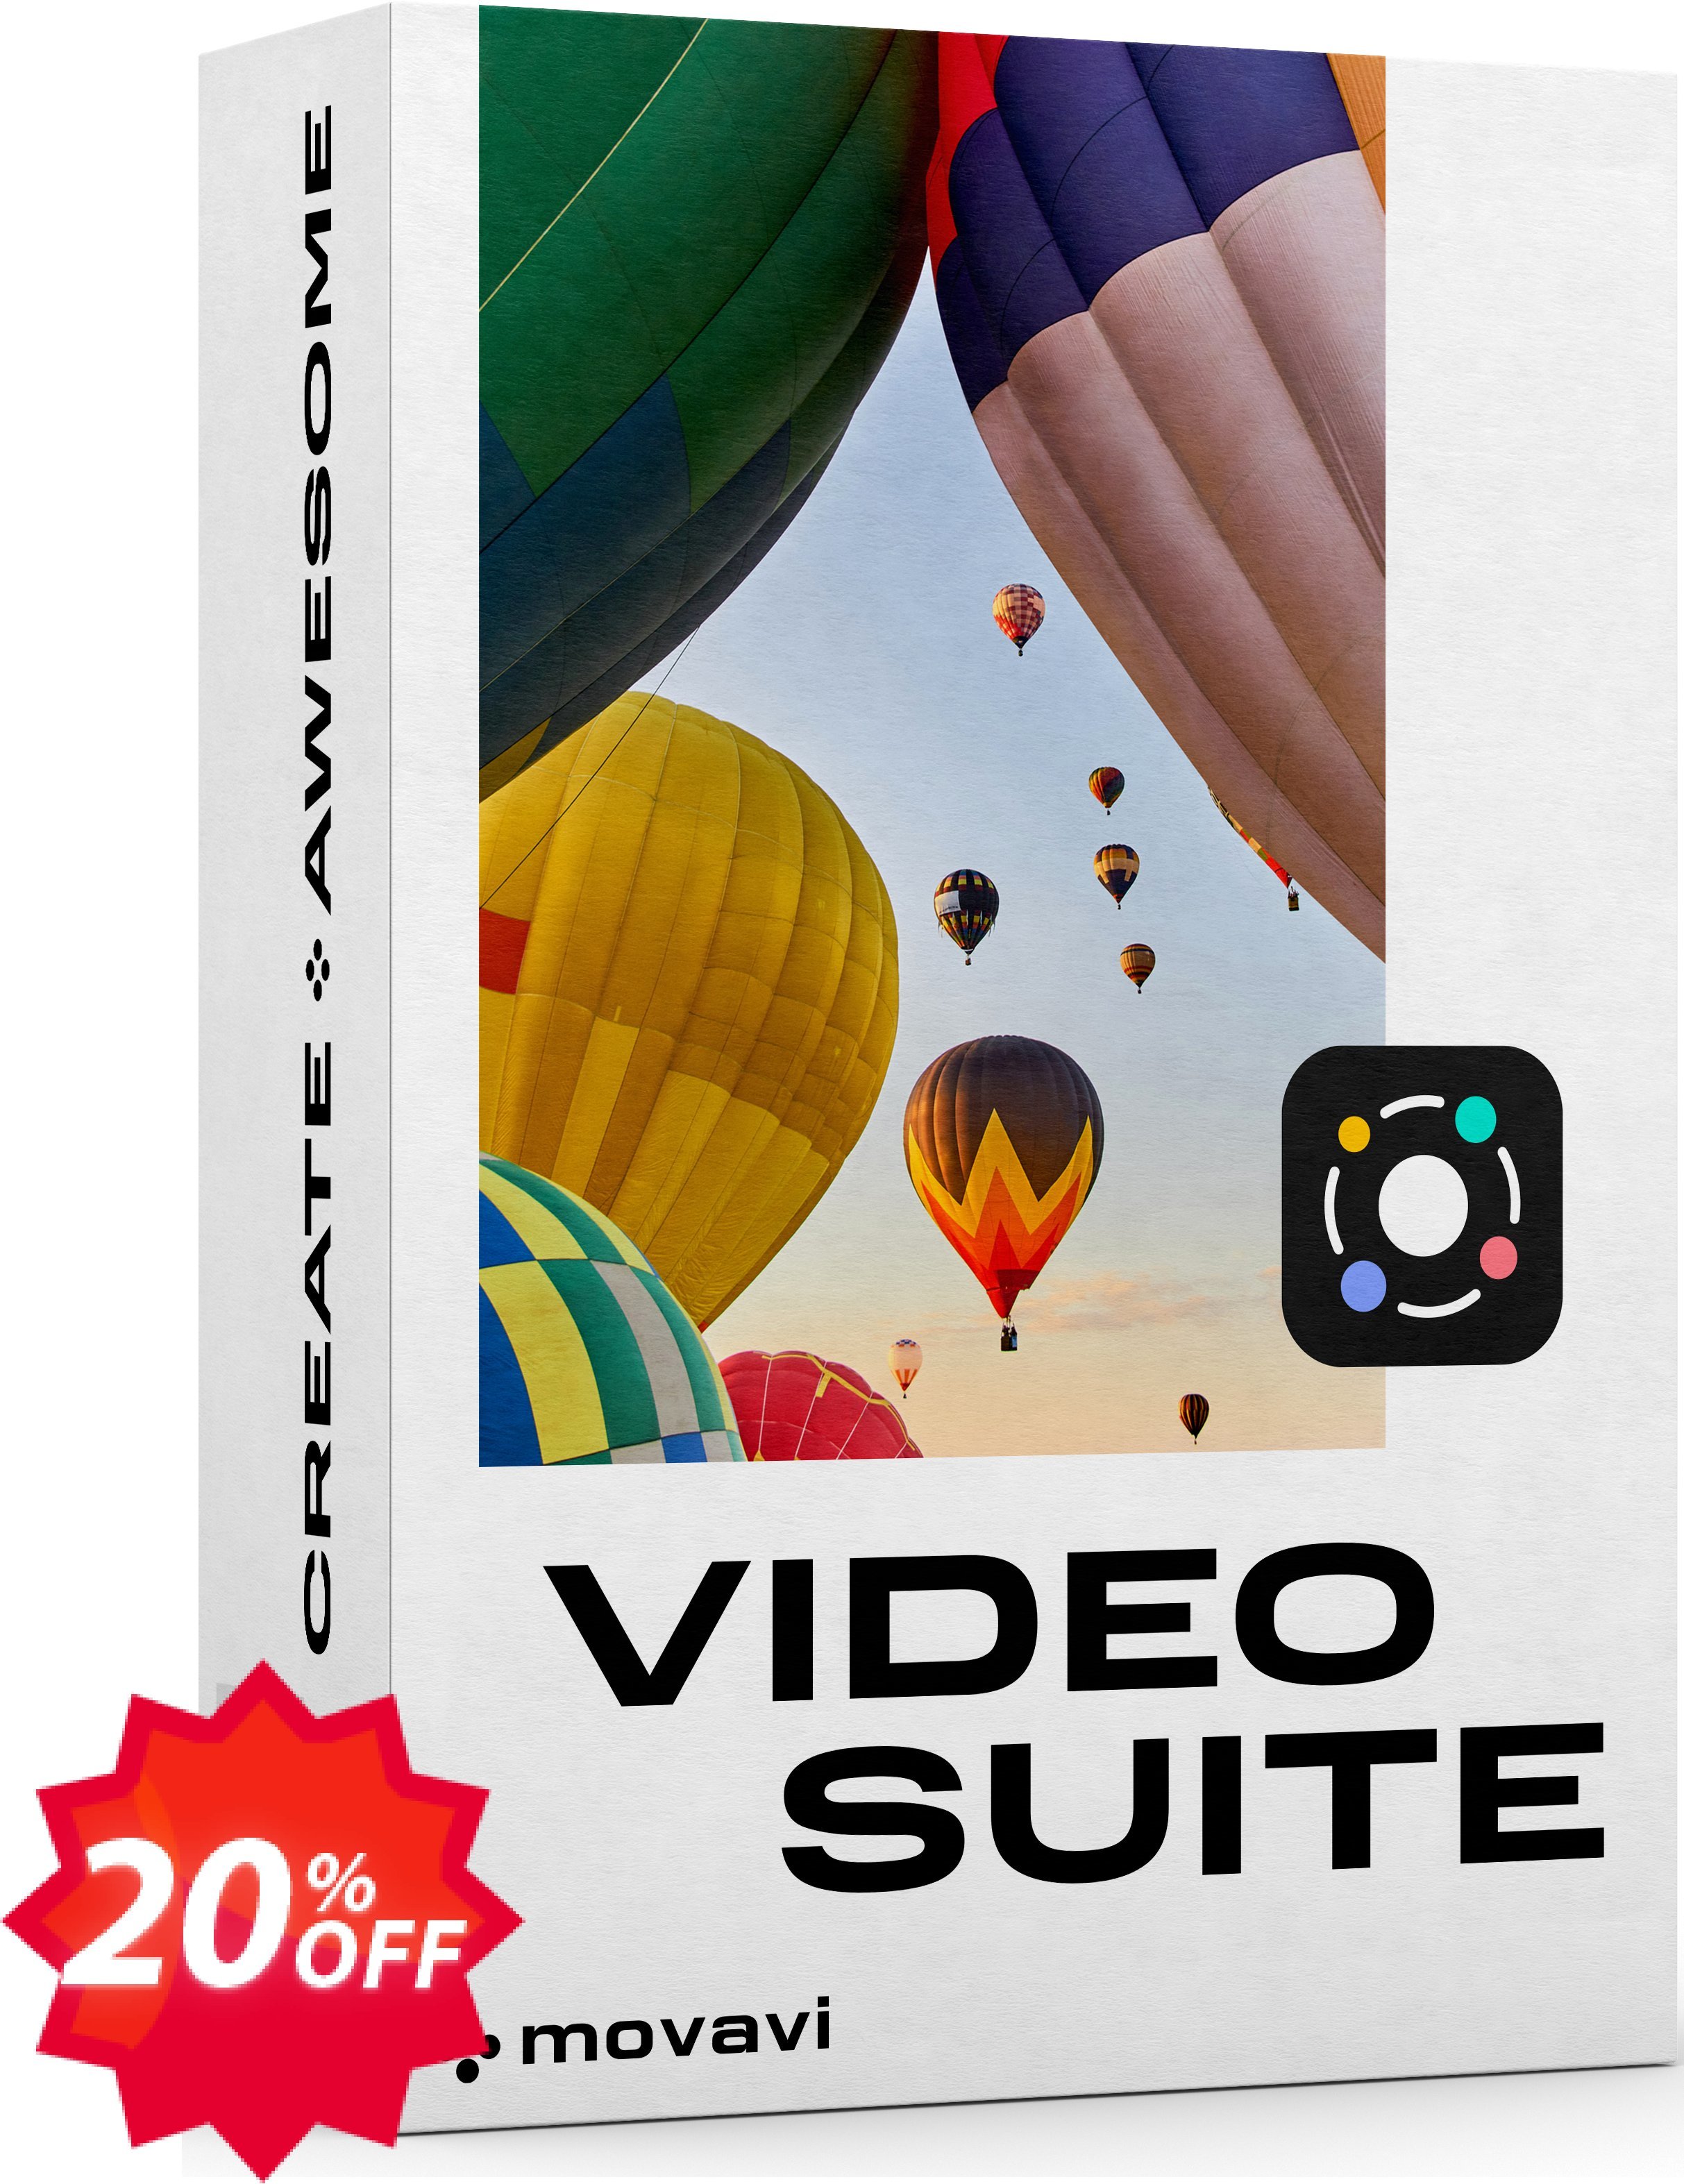 Movavi Bundle: Video Suite + Photo Editor + Effects Coupon code 20% discount 